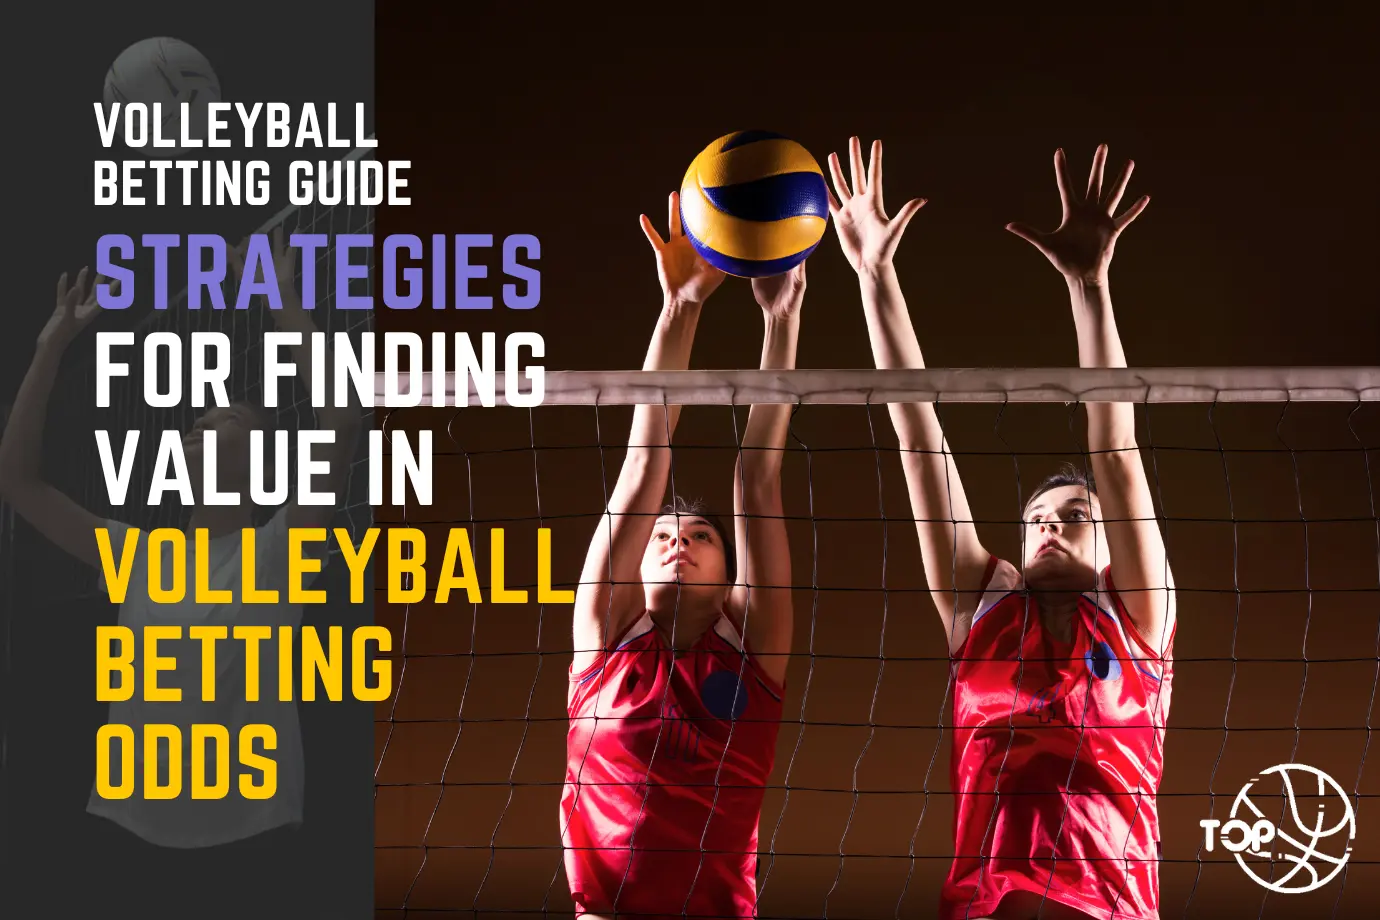 Strategies for Finding Value in Volleyball Betting Odds